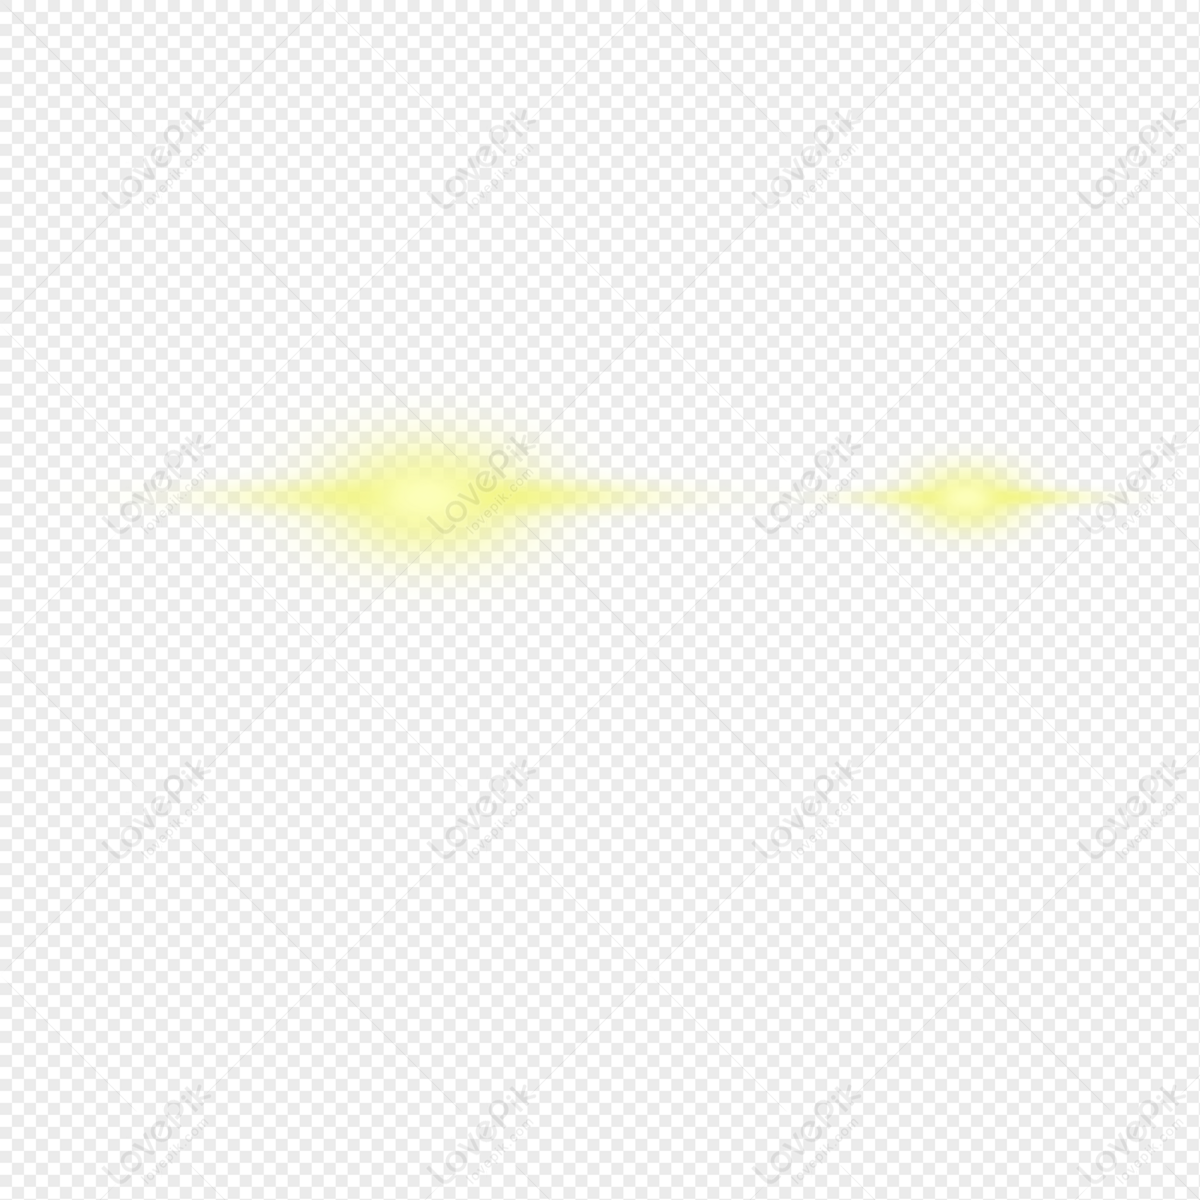 Yellow Glow PNG Transparent And Clipart Image For Free Download - Lovepik |  401485116